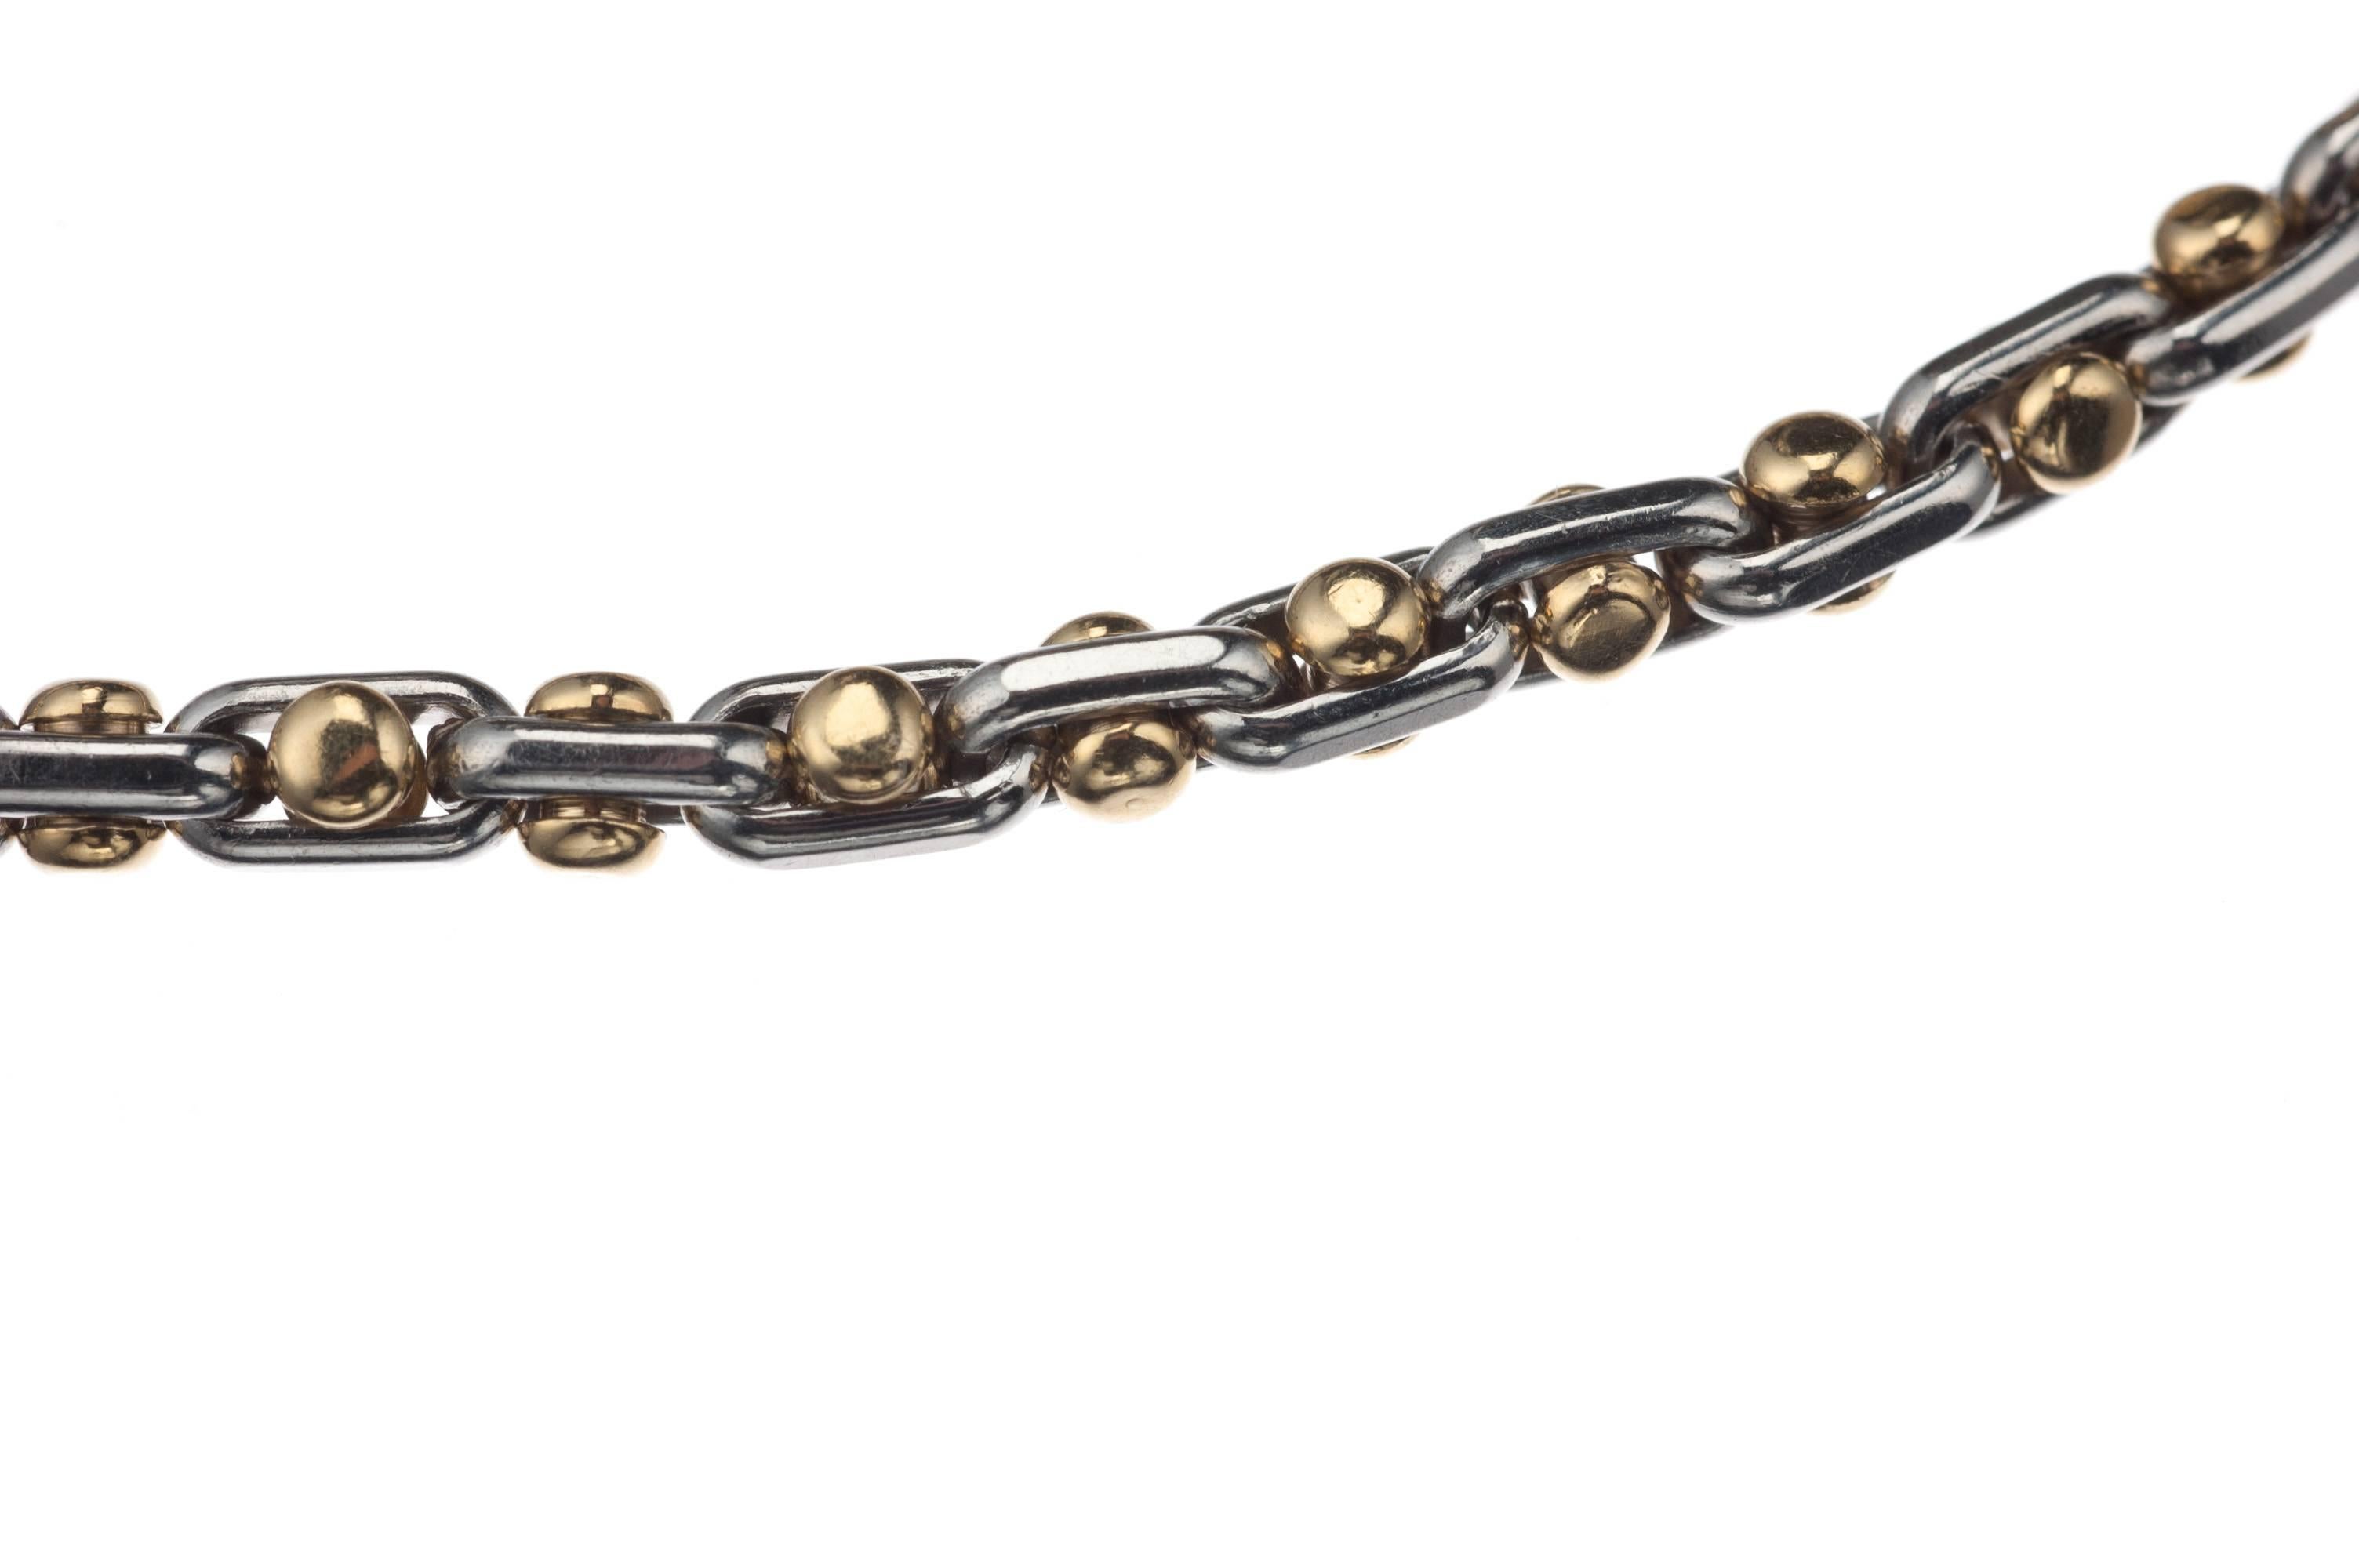 Fashioned in both platinum and 18-karat yellow gold, this distinct chain link bracelet has yellow gold bar bells inserted in the empty space of its platinum links giving the bracelet a unique texture and rhythm. Measures approx. 8.5” long. 
